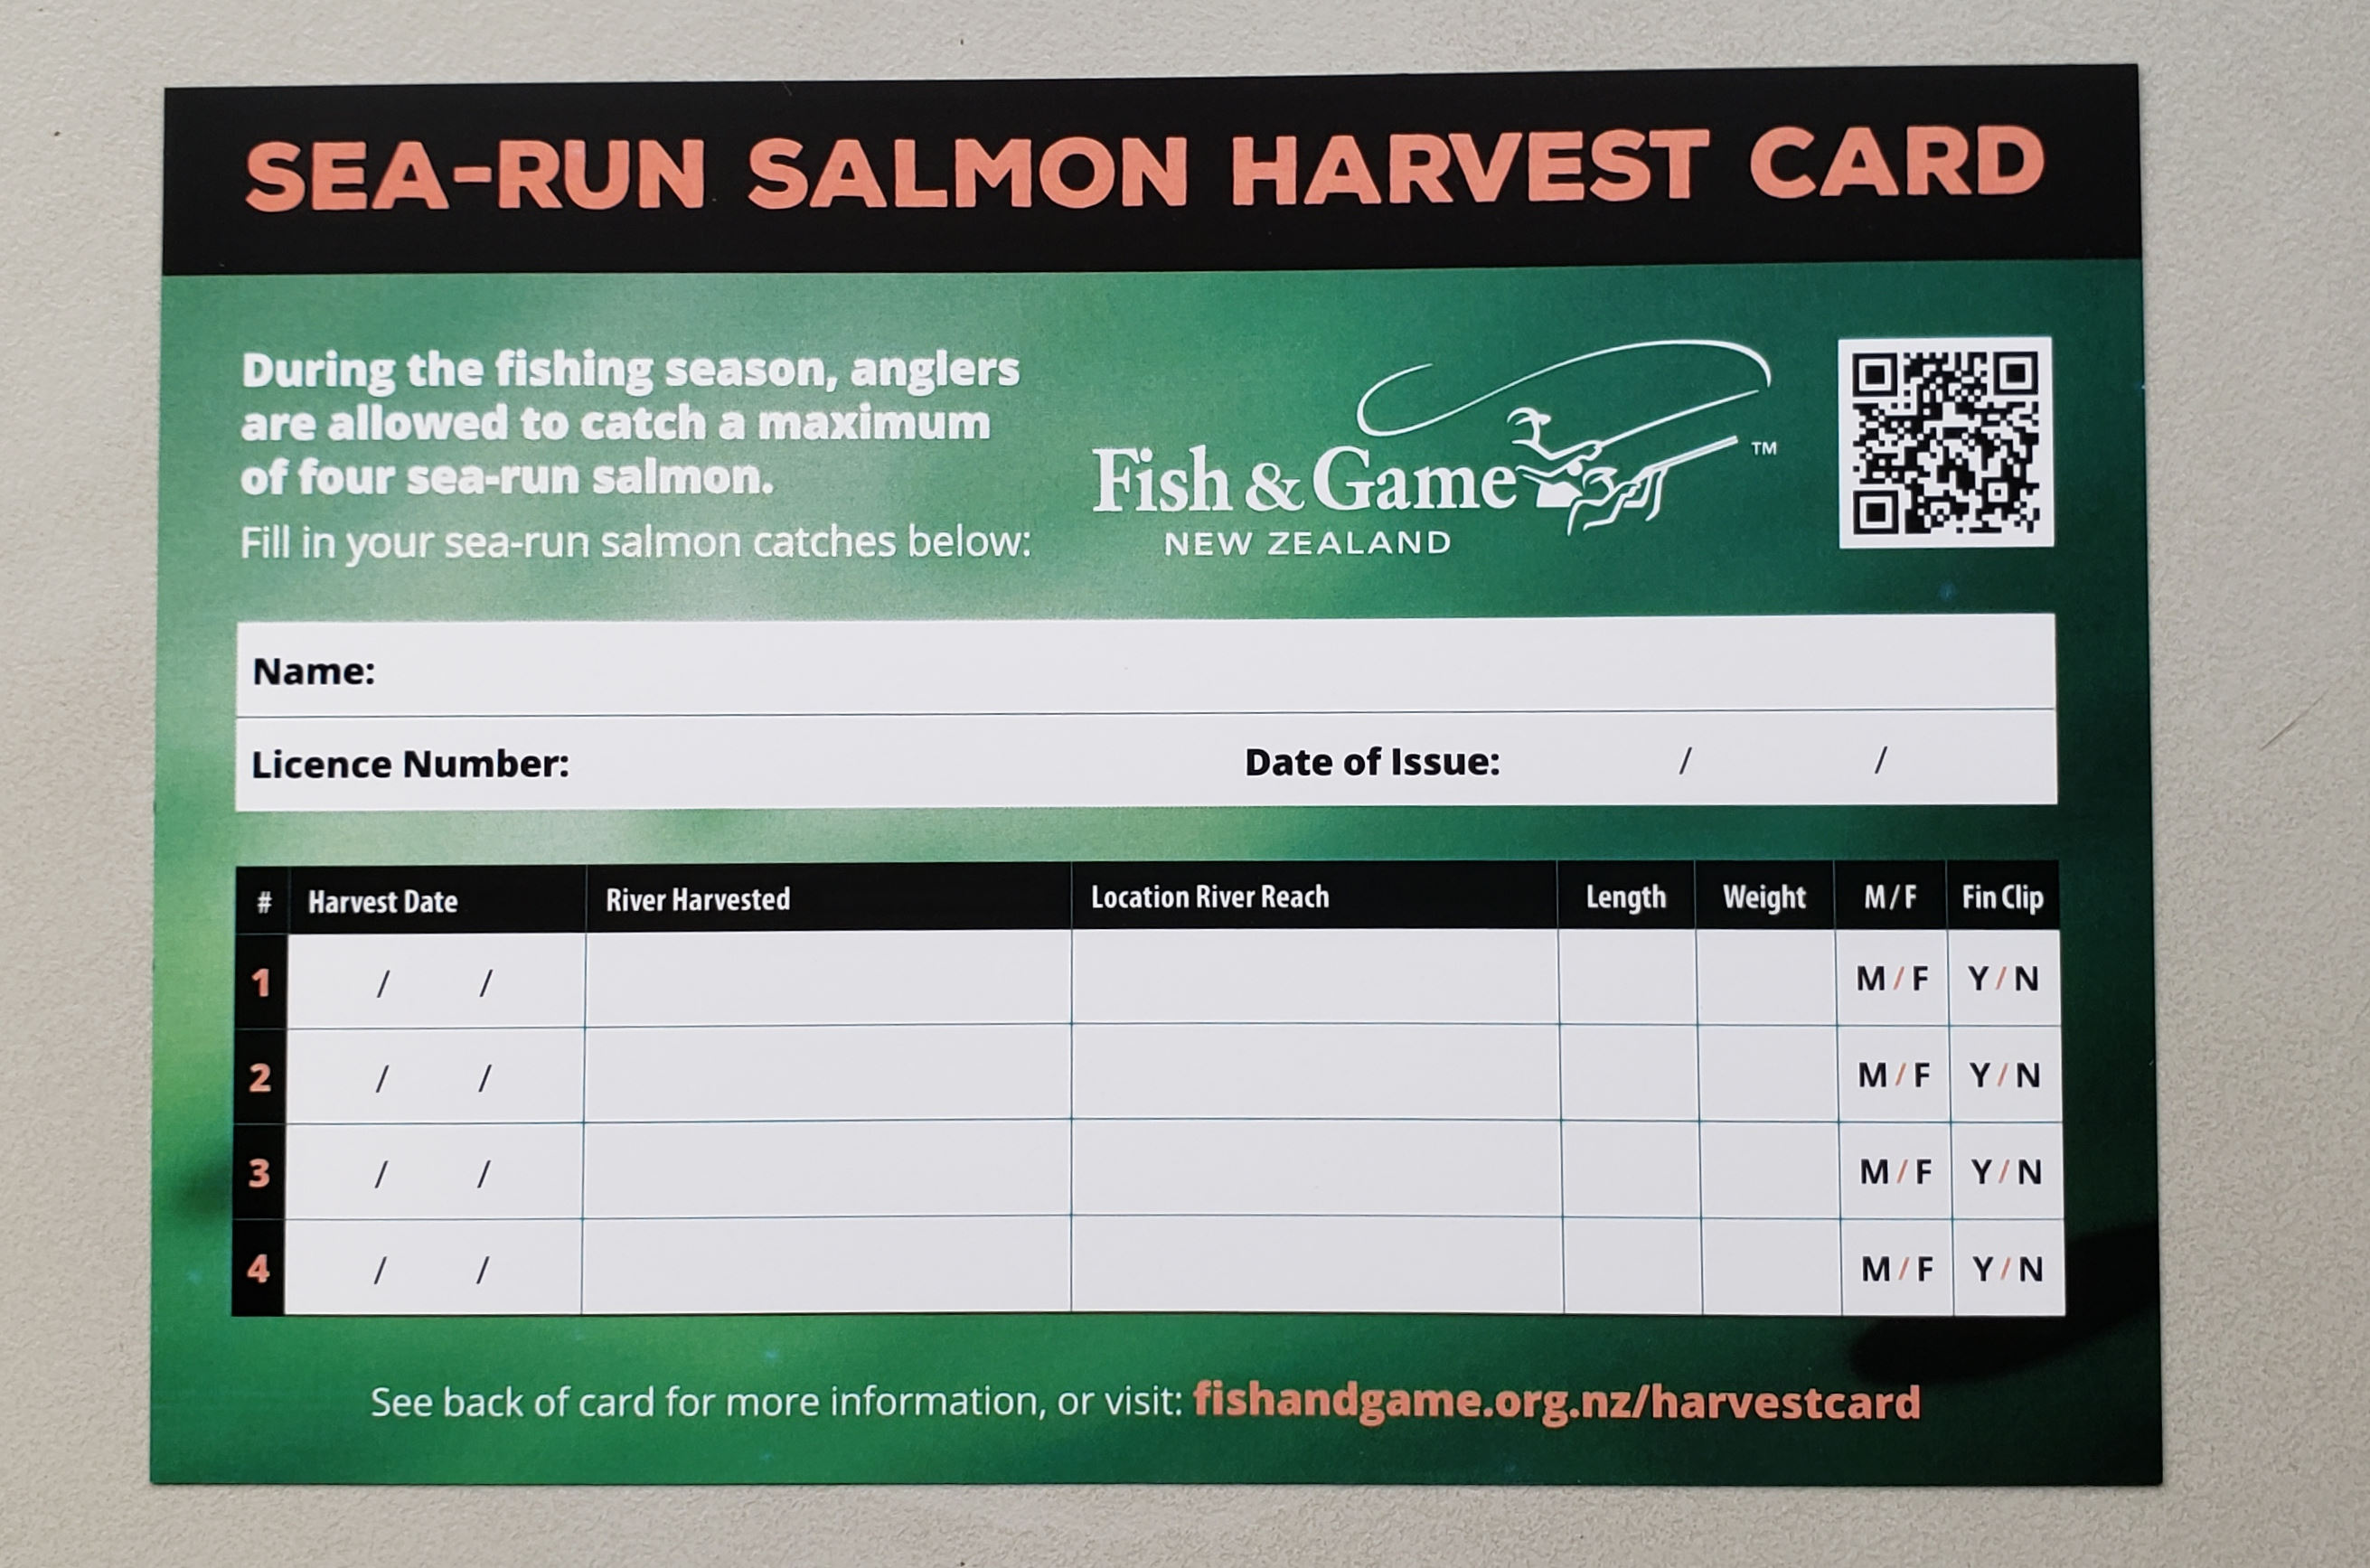 WFR2021.40 sea run salmon season bag harvest cards are being trialled in the Central South Island Fish Game Region in 2021